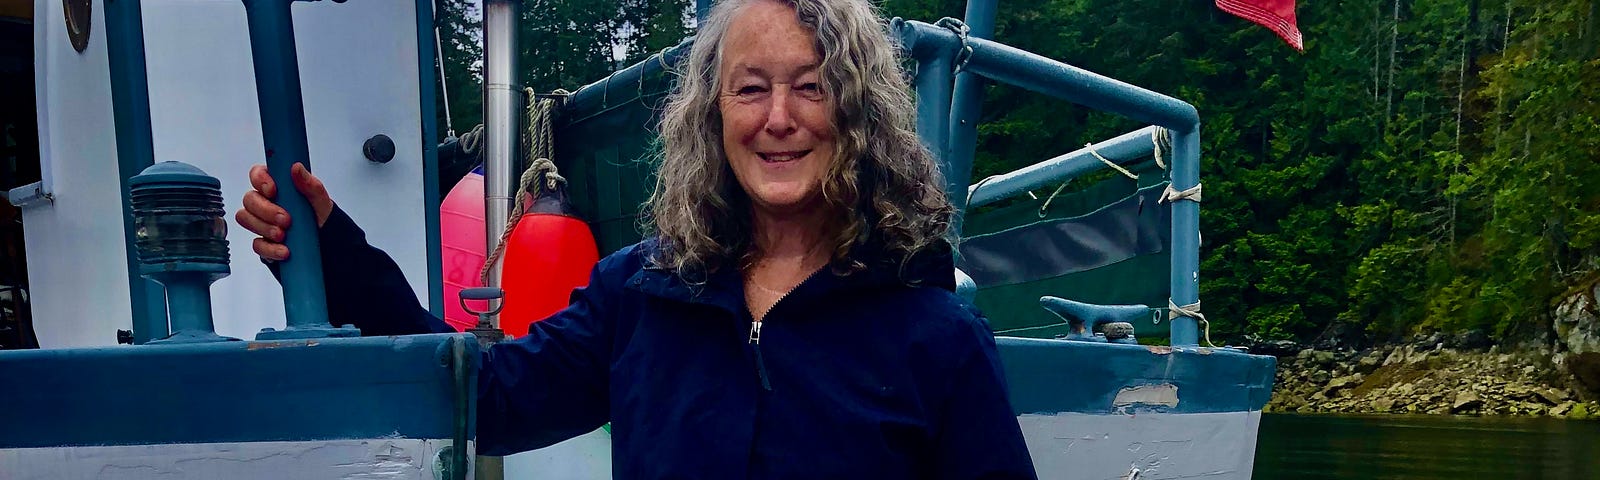 A woman stands on the stern of a boat. She is holding a rope and holding on to the boat with the other. She has long grey hair.